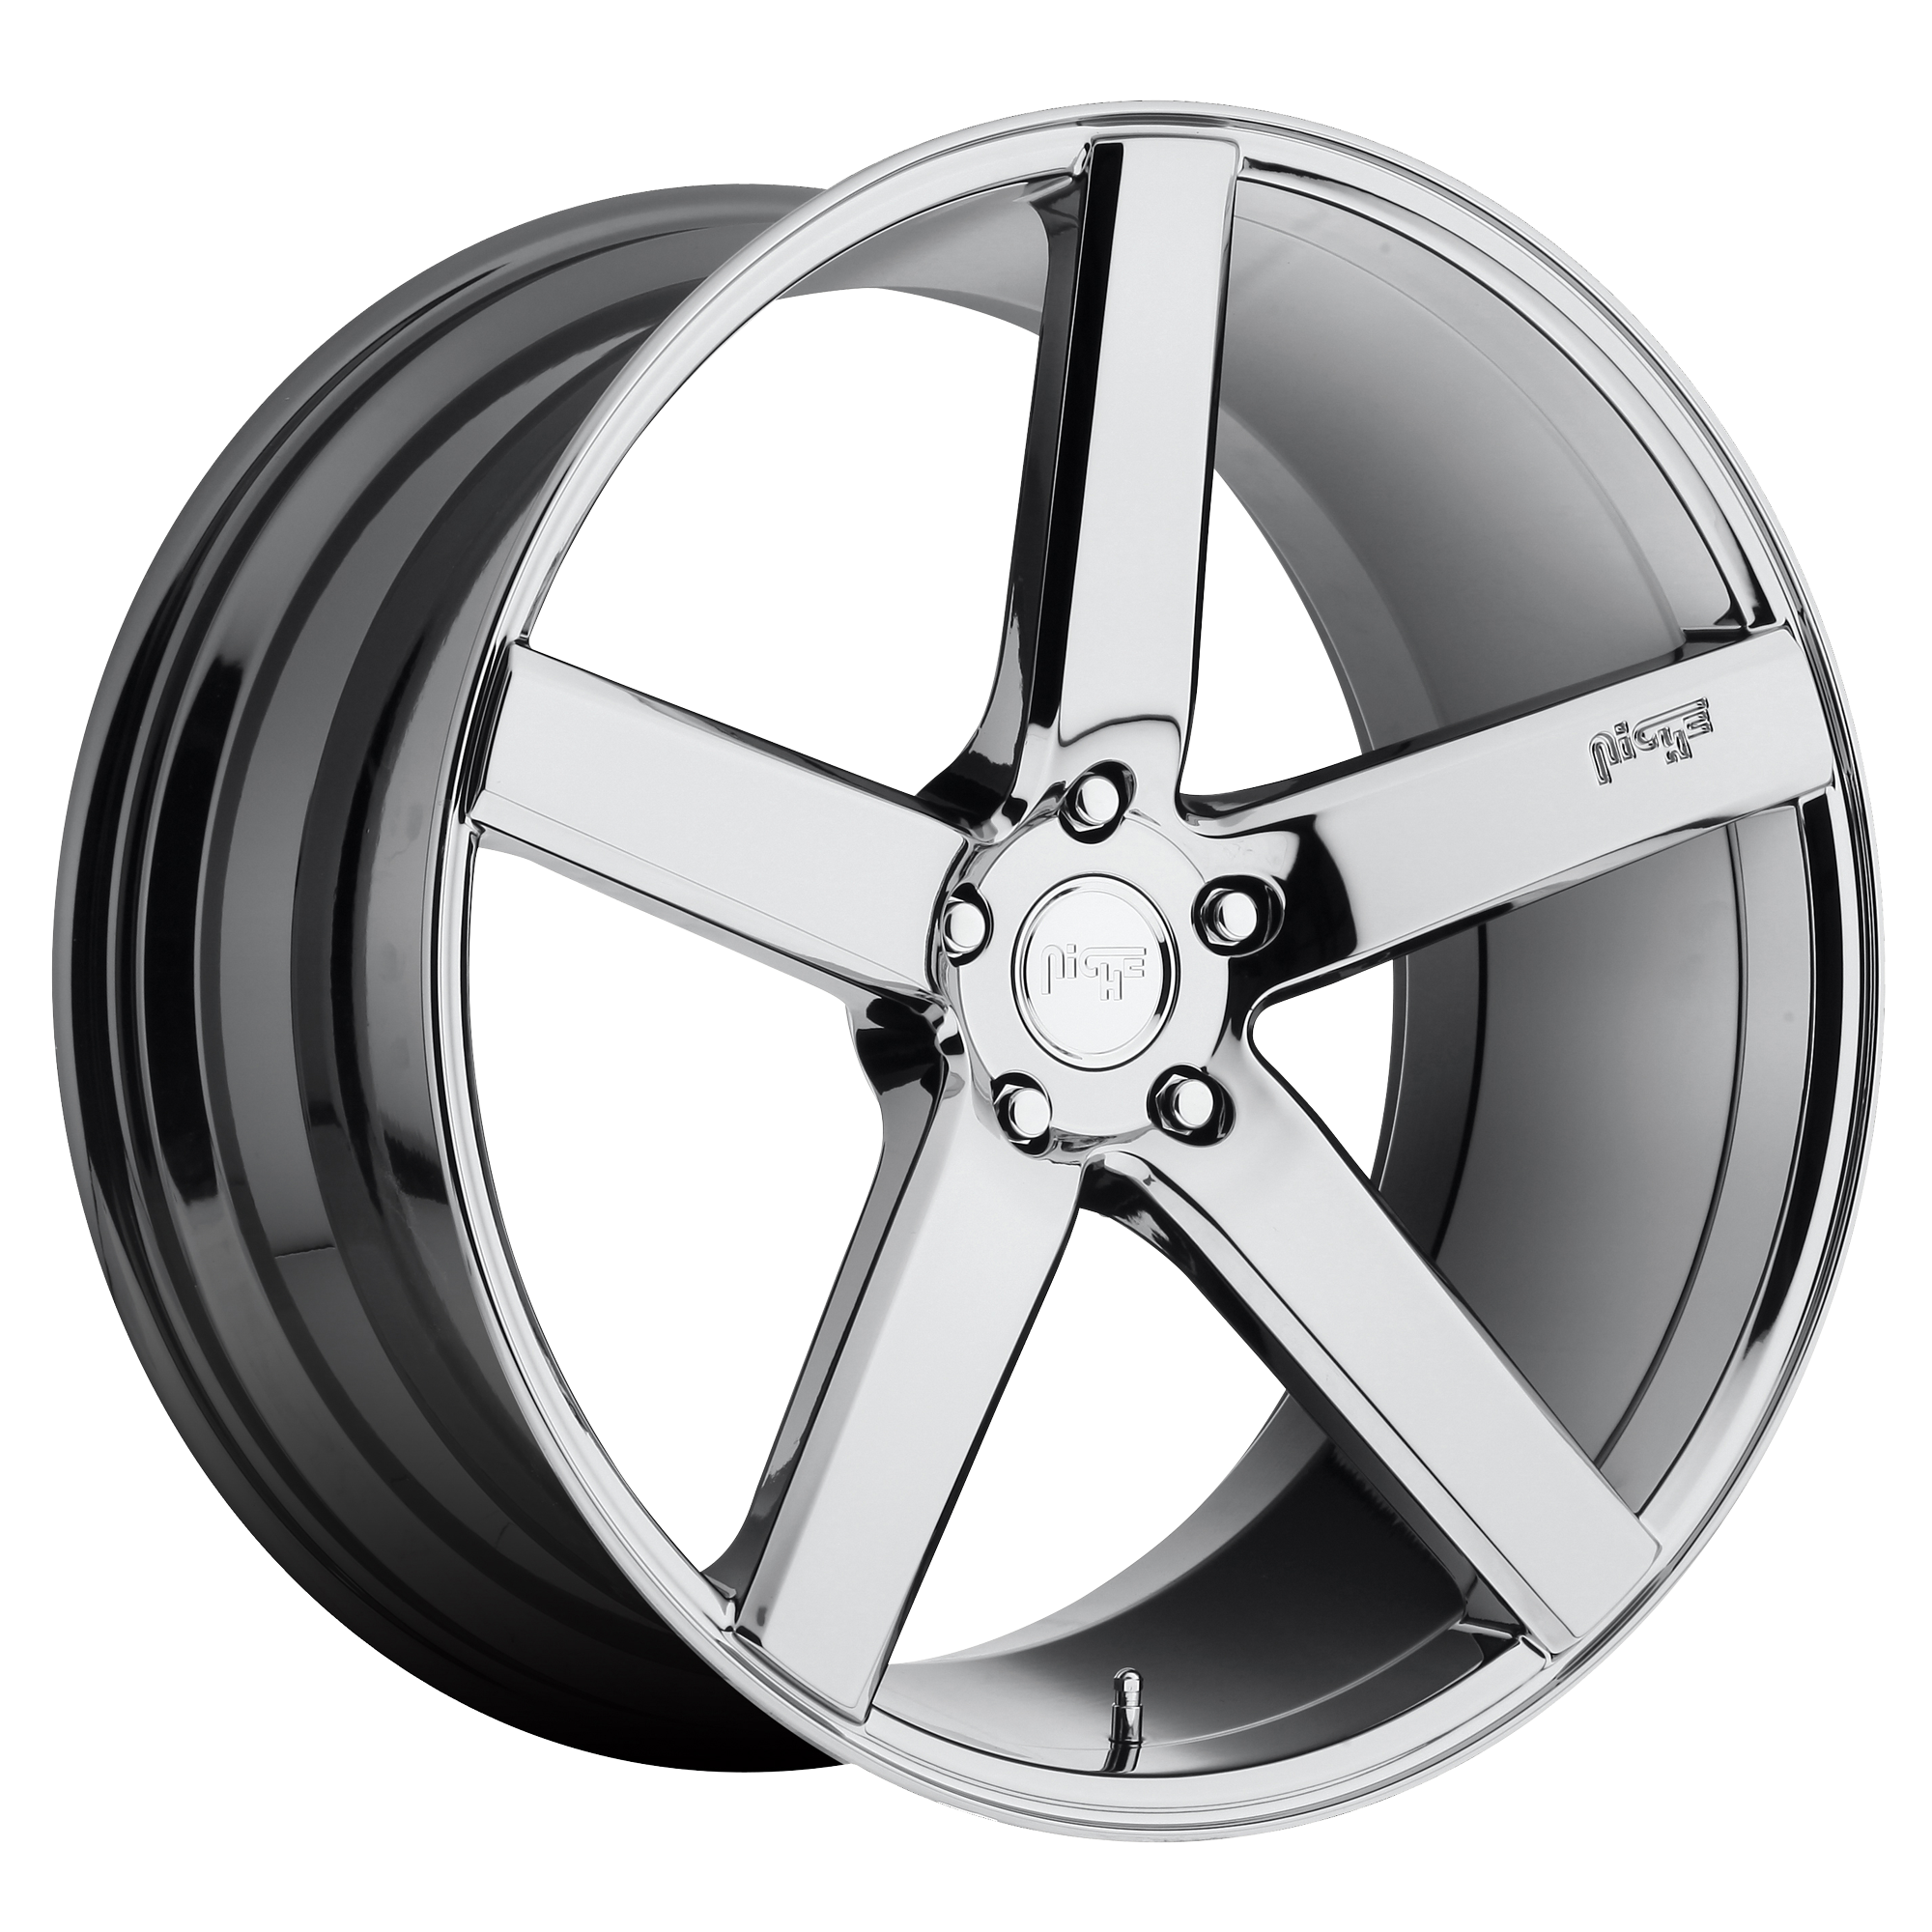 MILAN 20x8.5 5x114.30 CHROME PLATED (35 mm) - Tires and Engine Performance